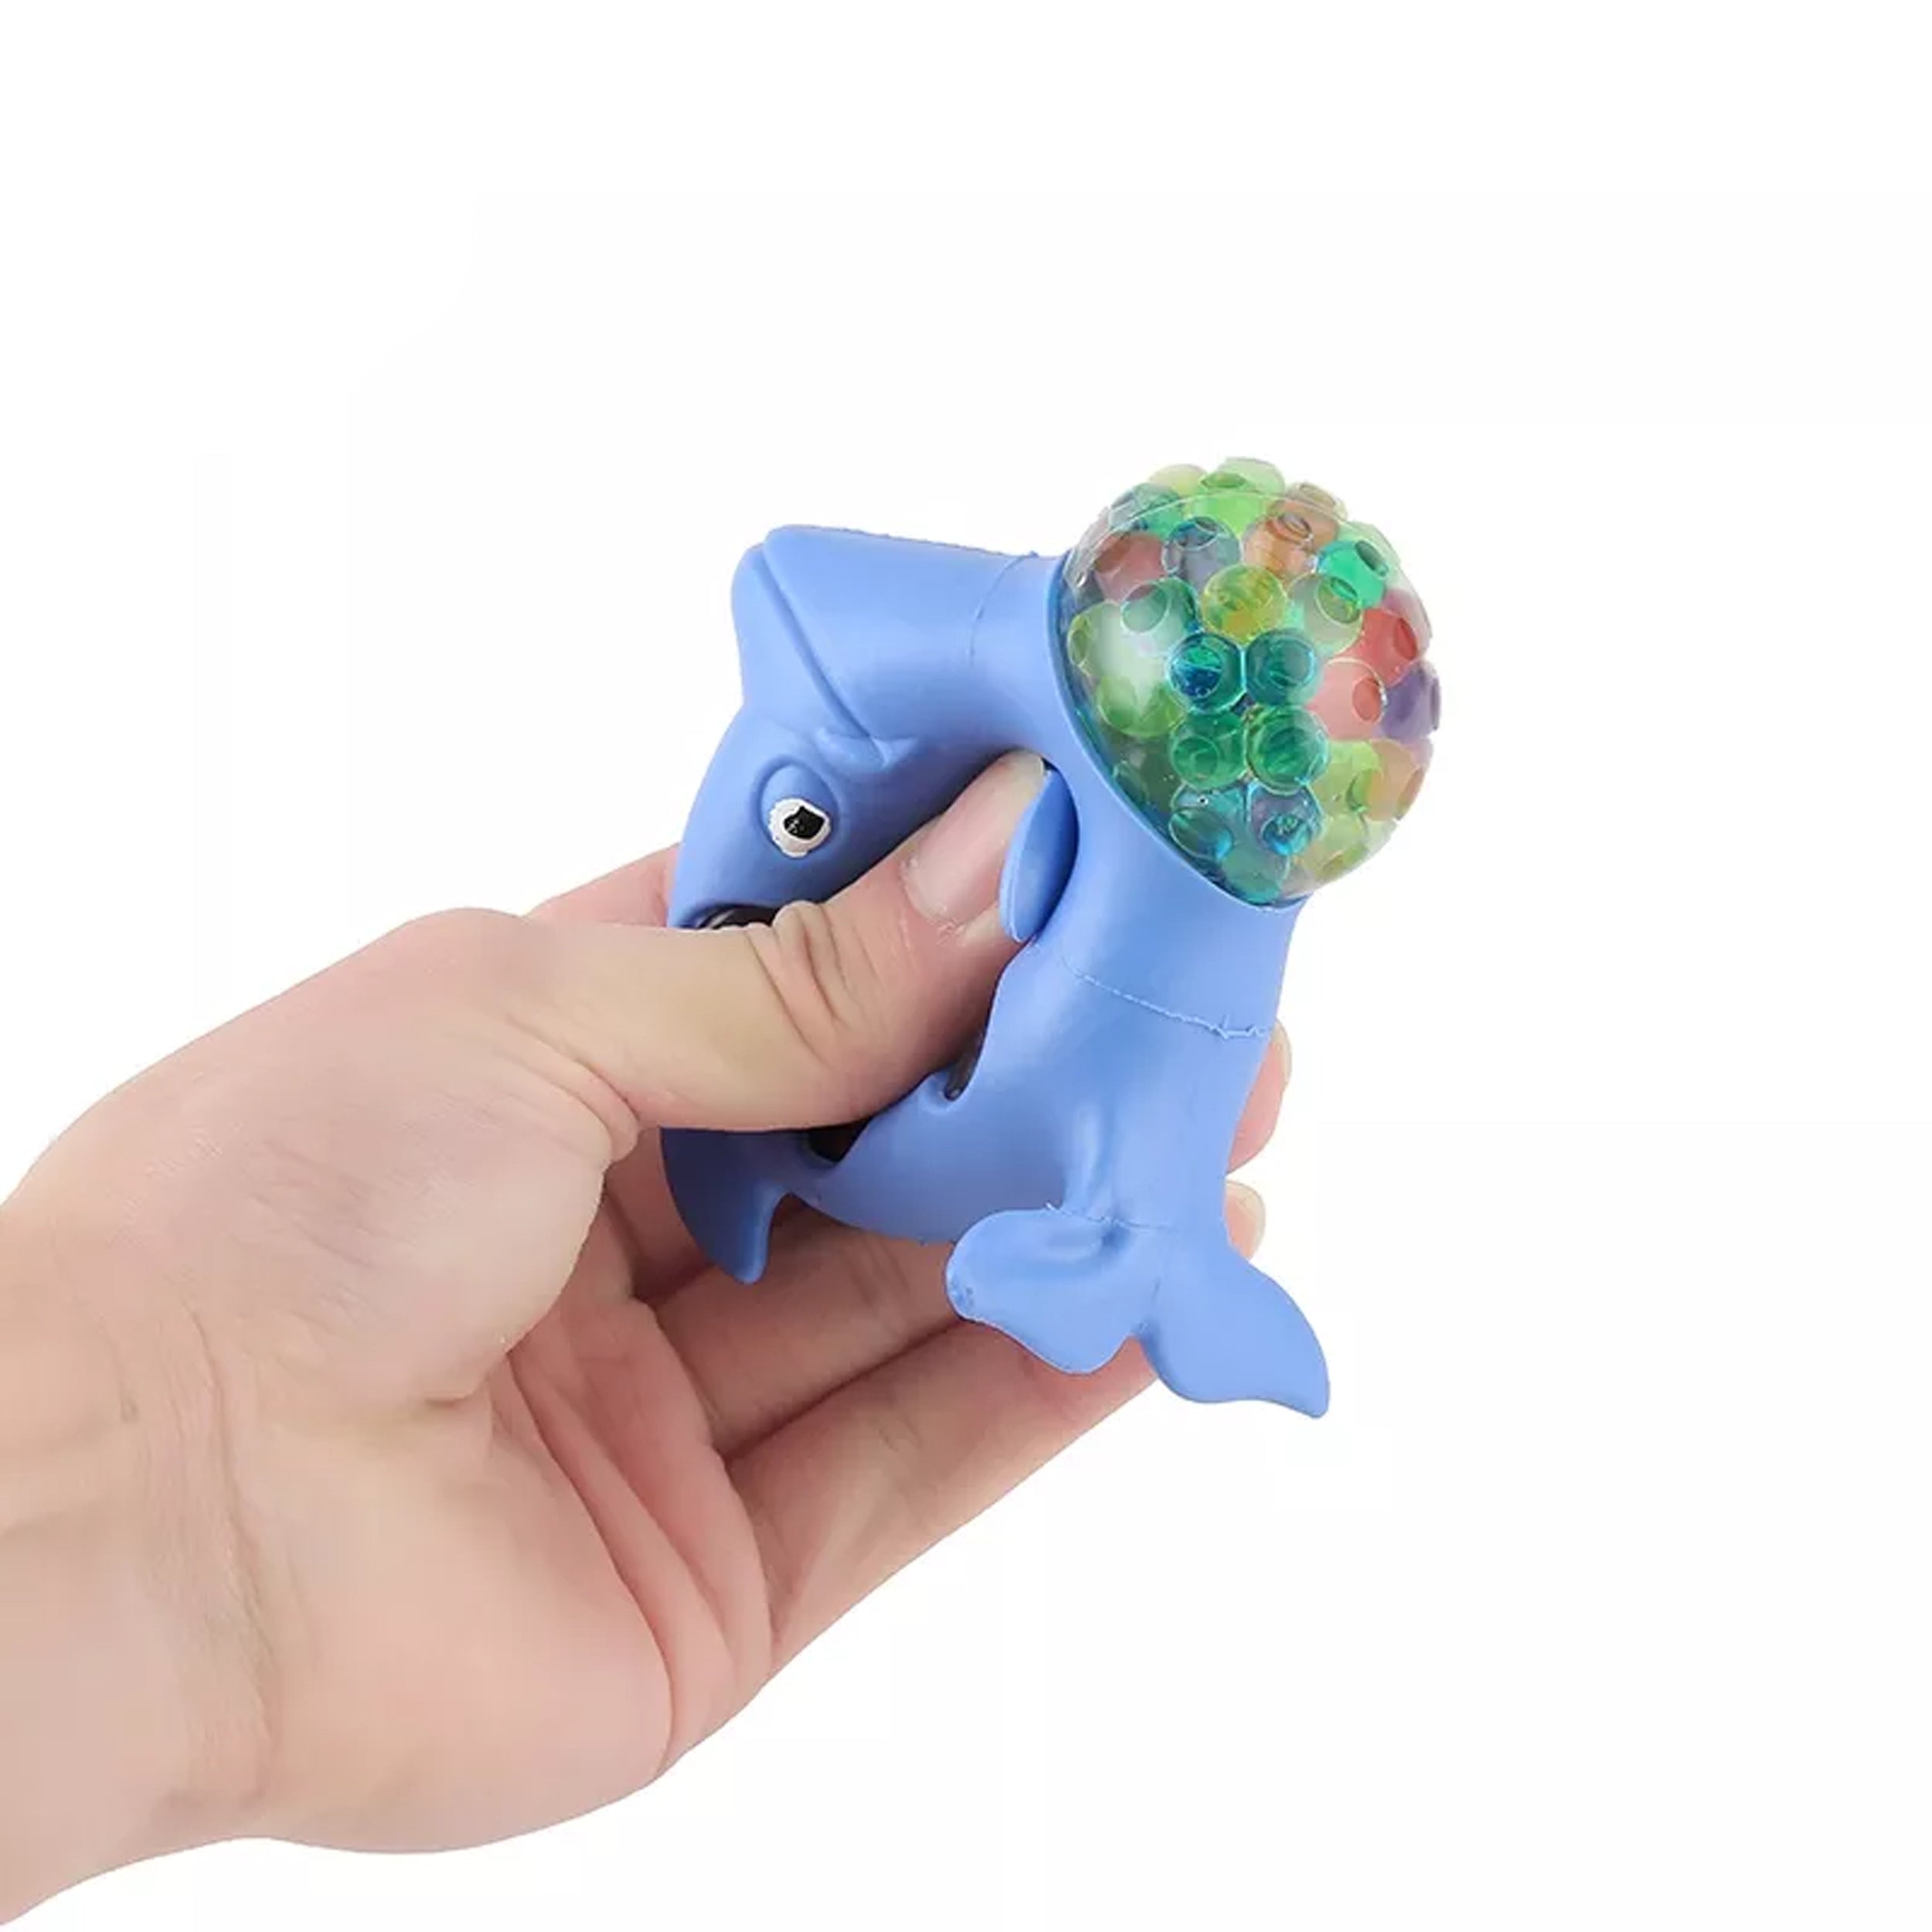 Take Playtime to New Heights with our Flying Turkey Catapult Toy